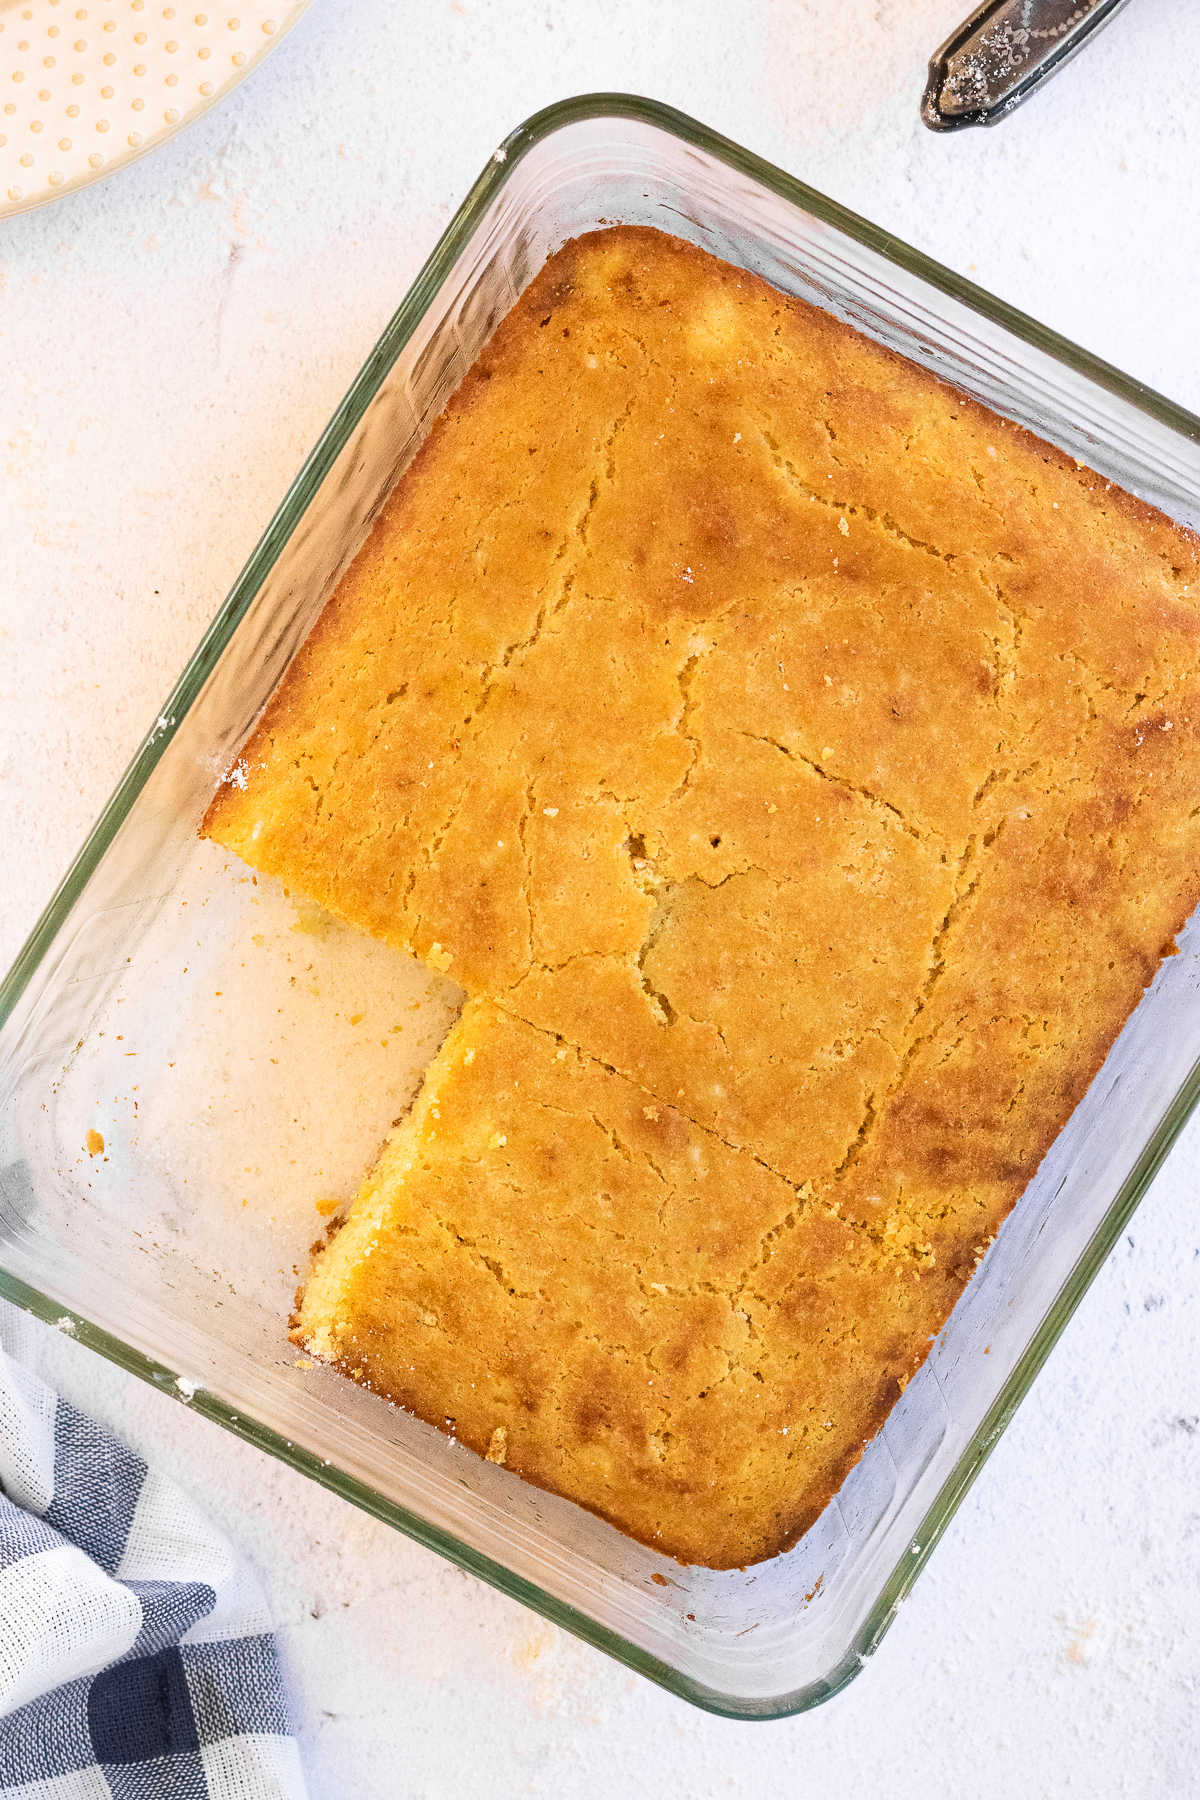 Overhead view of baked cornbread with a serving removed